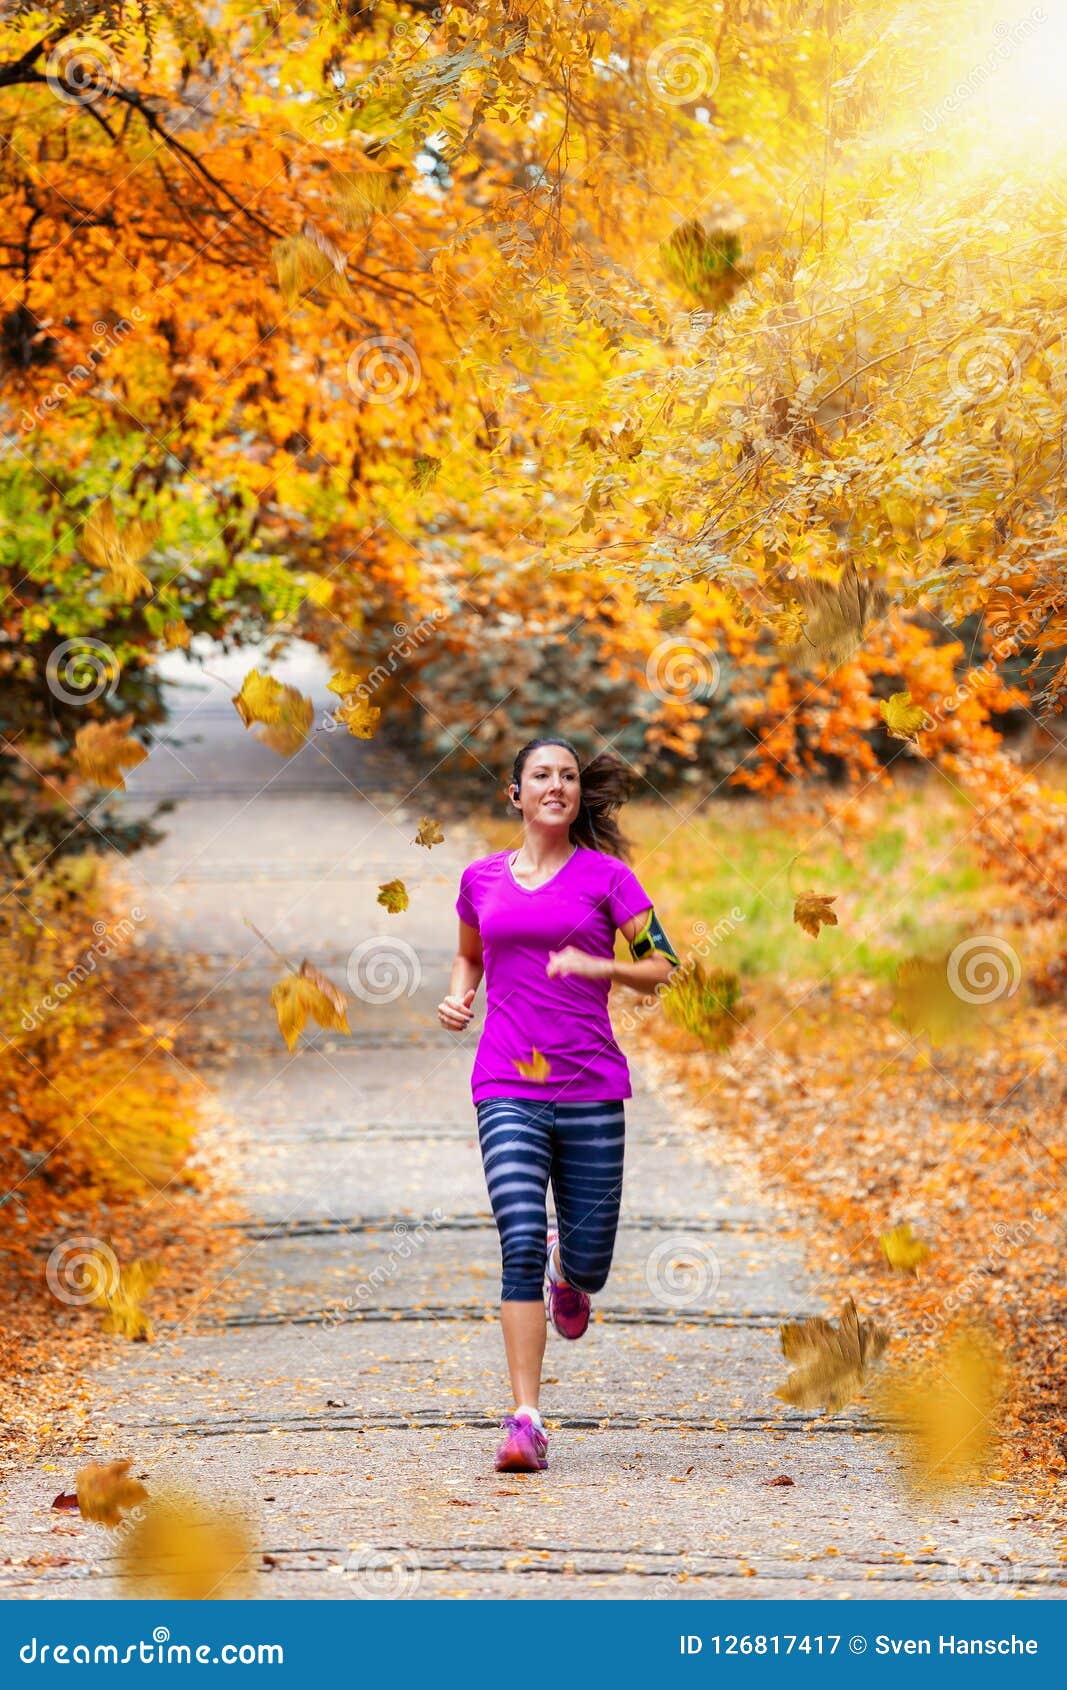 Woman Running in a Park during Autumn Time Stock Image - Image of ...